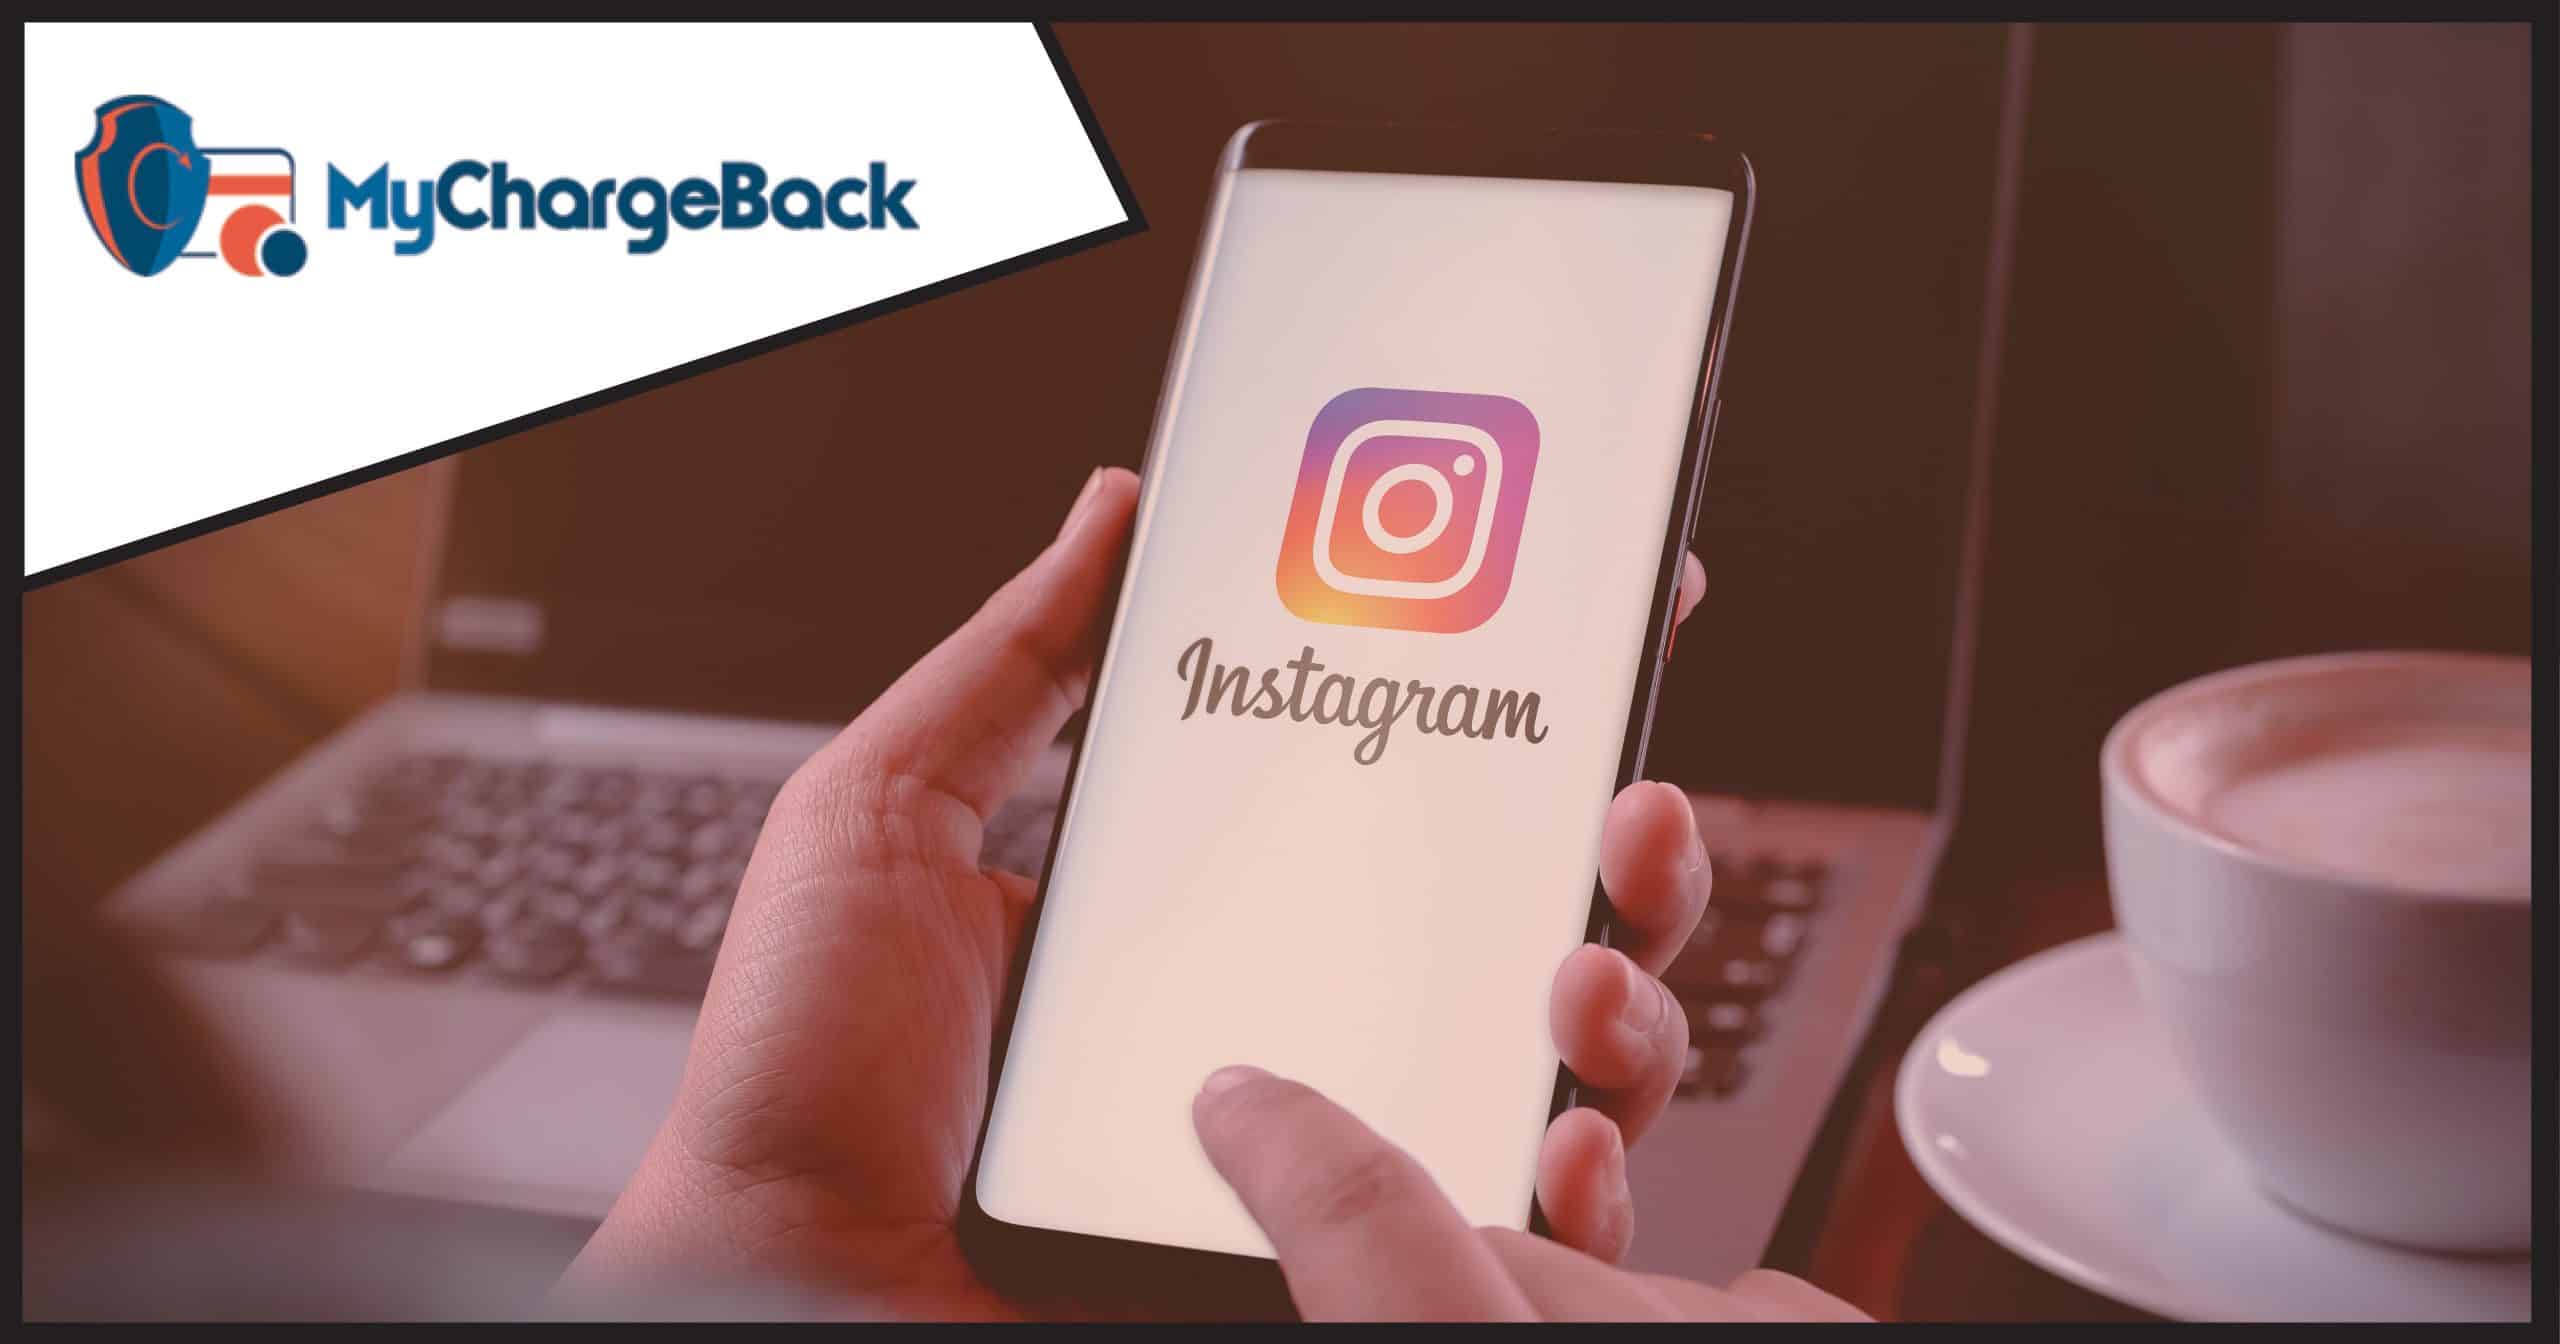 Hands hold a mobile phone featuring the instagram logo, used to illustrate a cryptocurrency scam